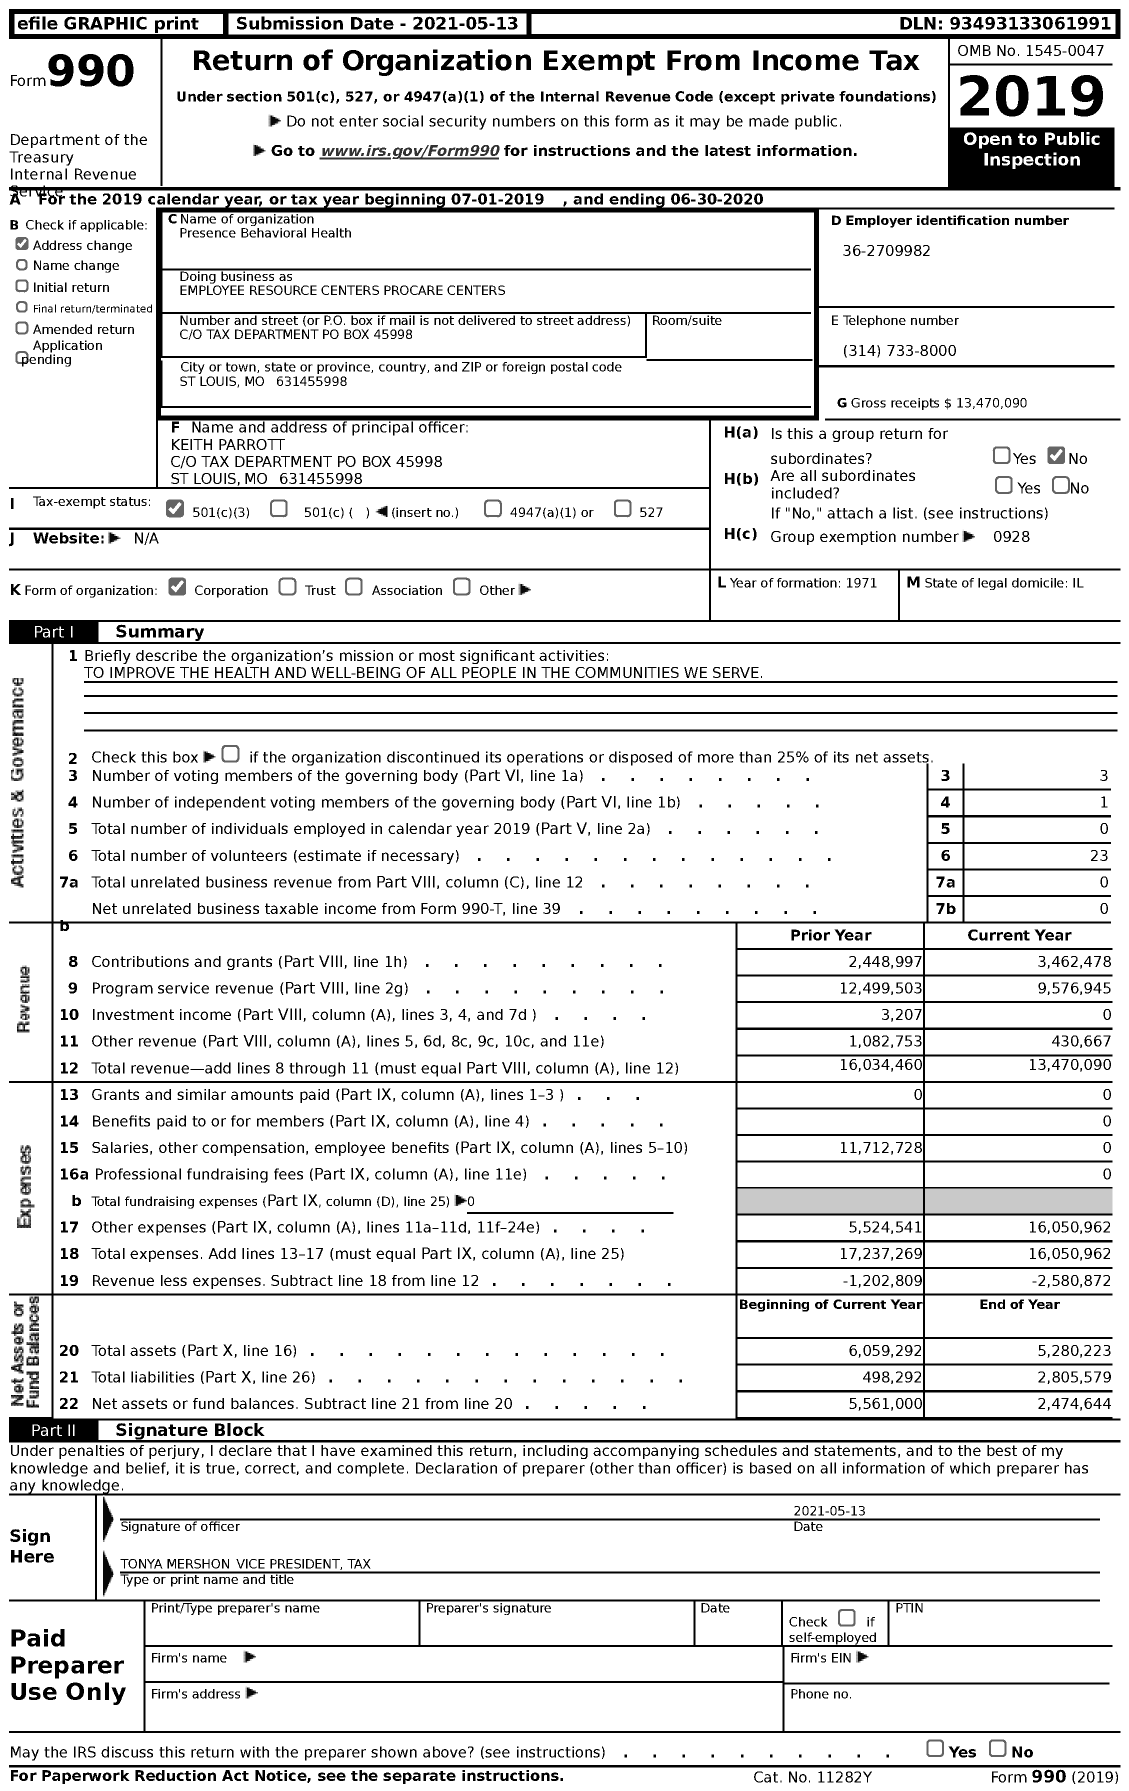 Image of first page of 2019 Form 990 for Employee Resource Centers Procare Centers